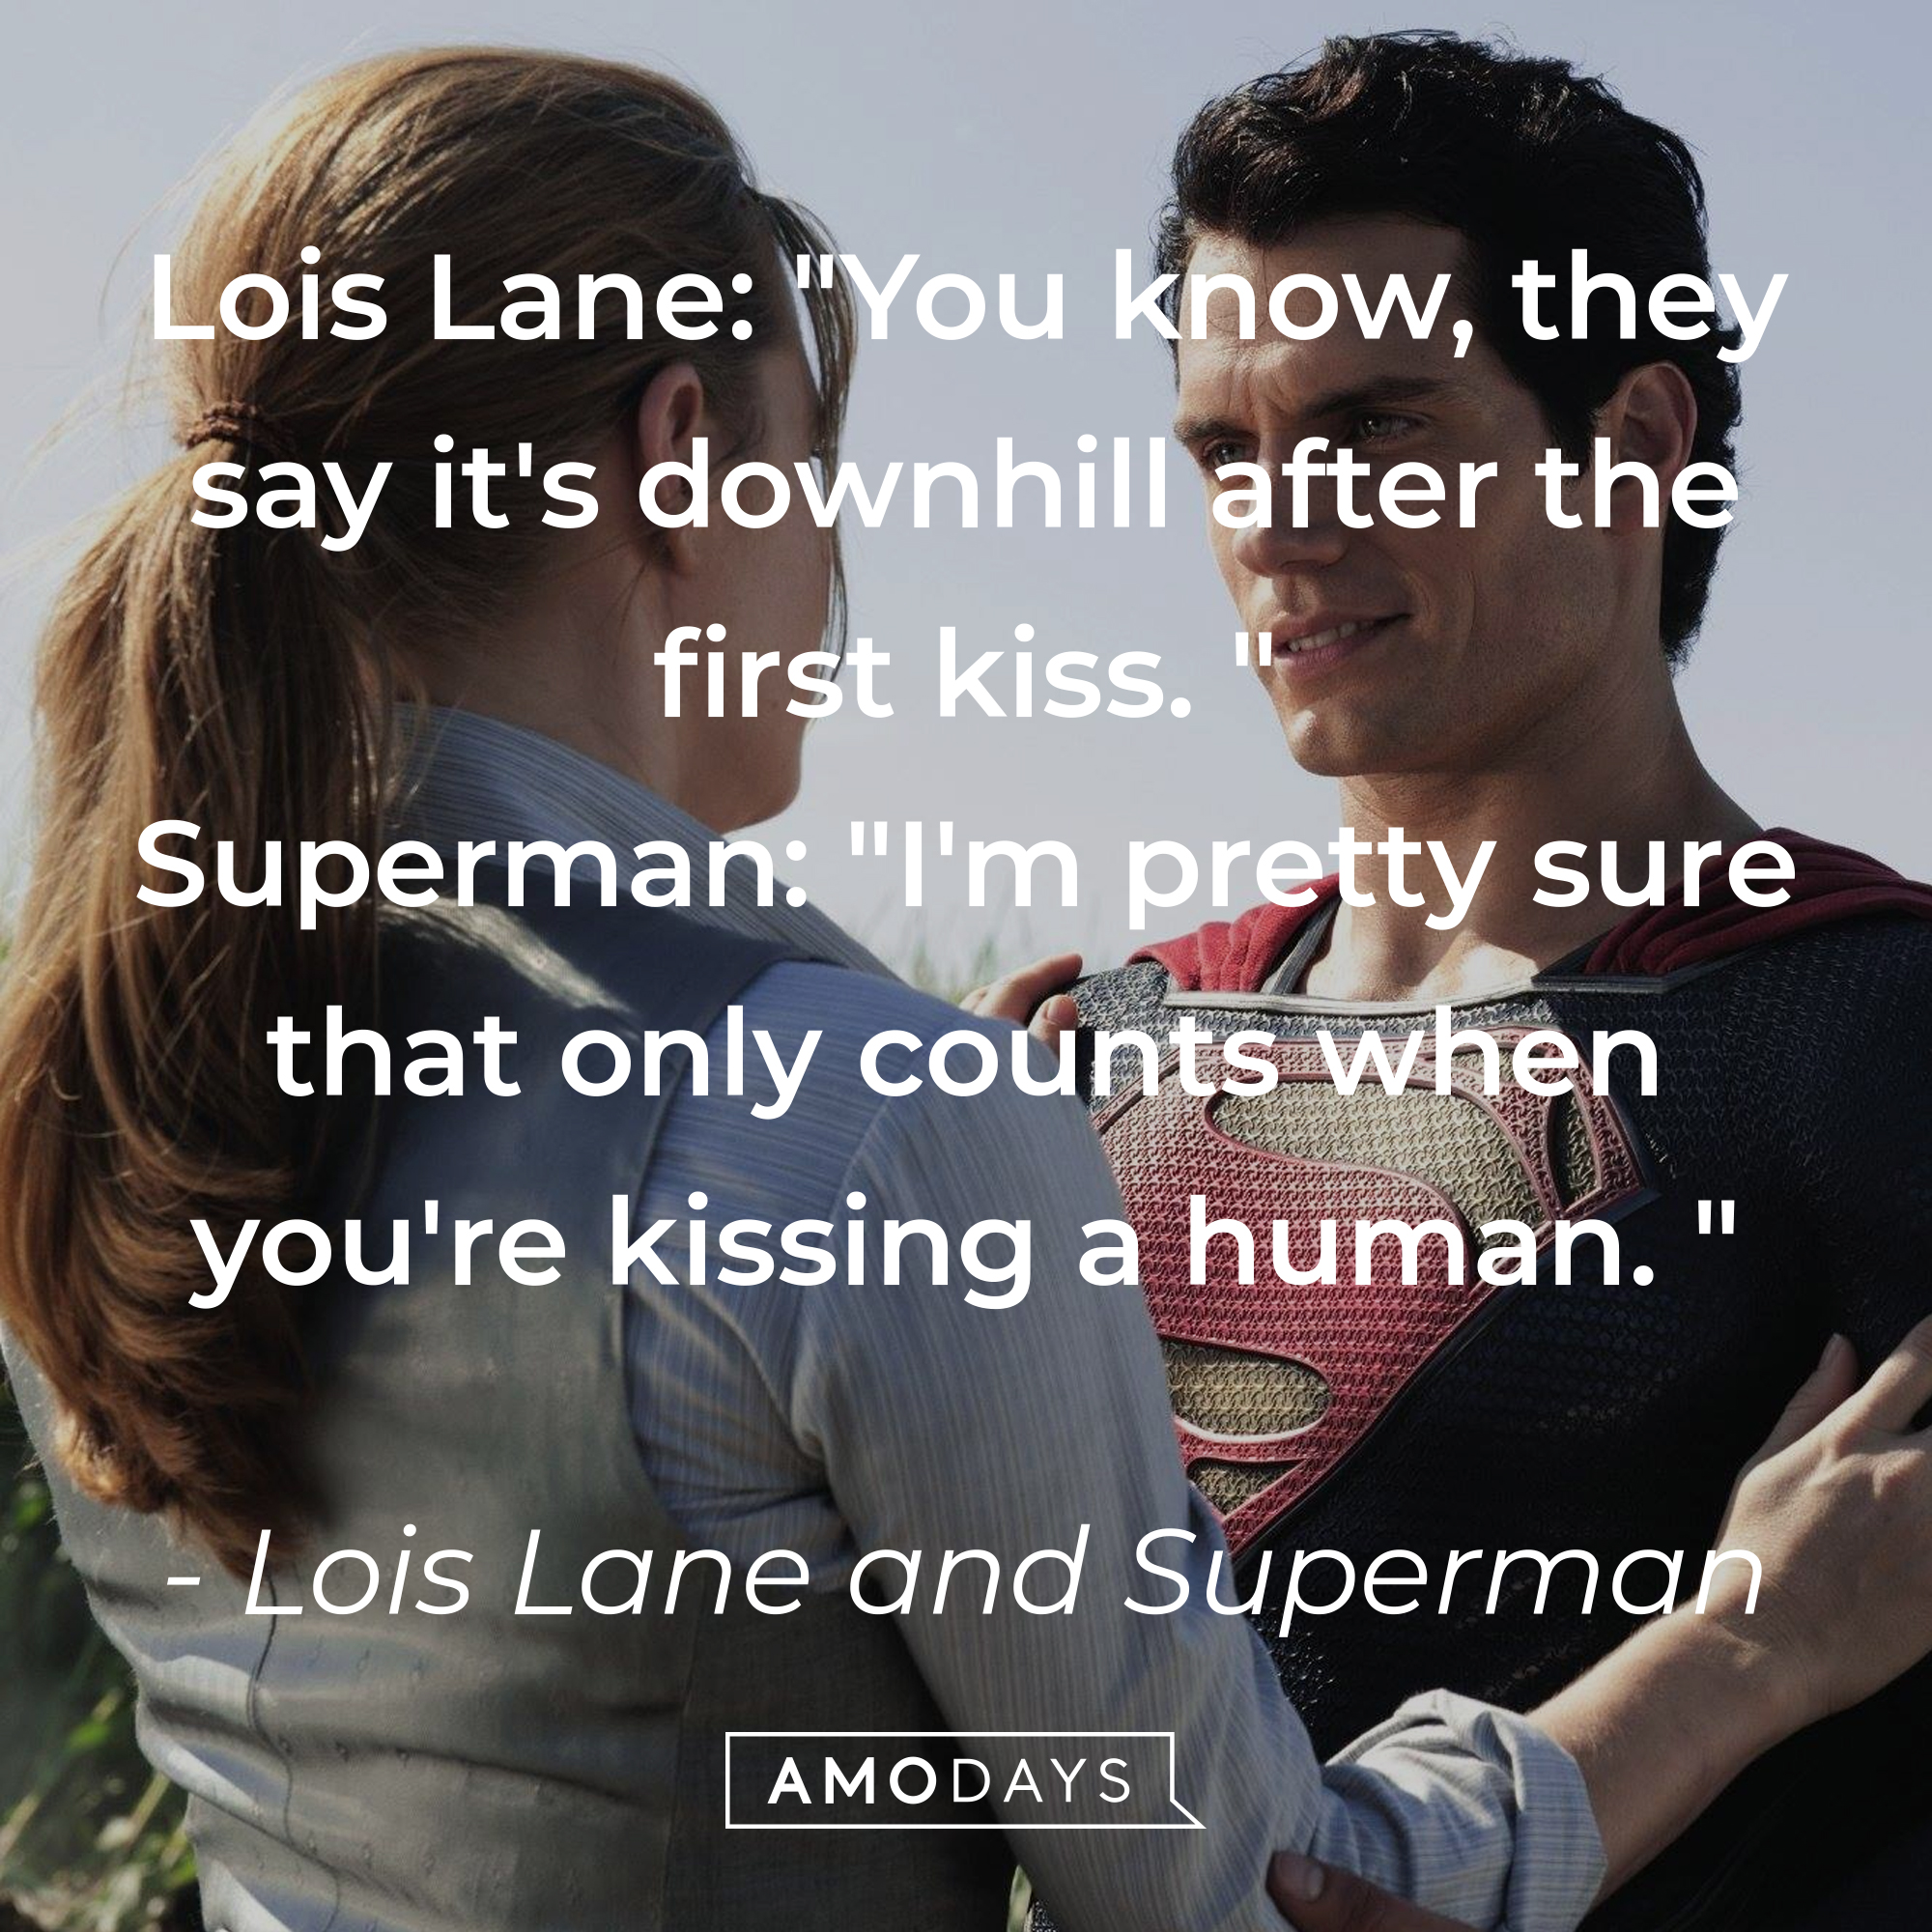 "Man of Steel" quote: Lois Lane: "You know, they say it's downhill after the first kiss. "  Superman: "I'm pretty sure that only counts when you're kissing a human." | Source: Facebook/manofsteel